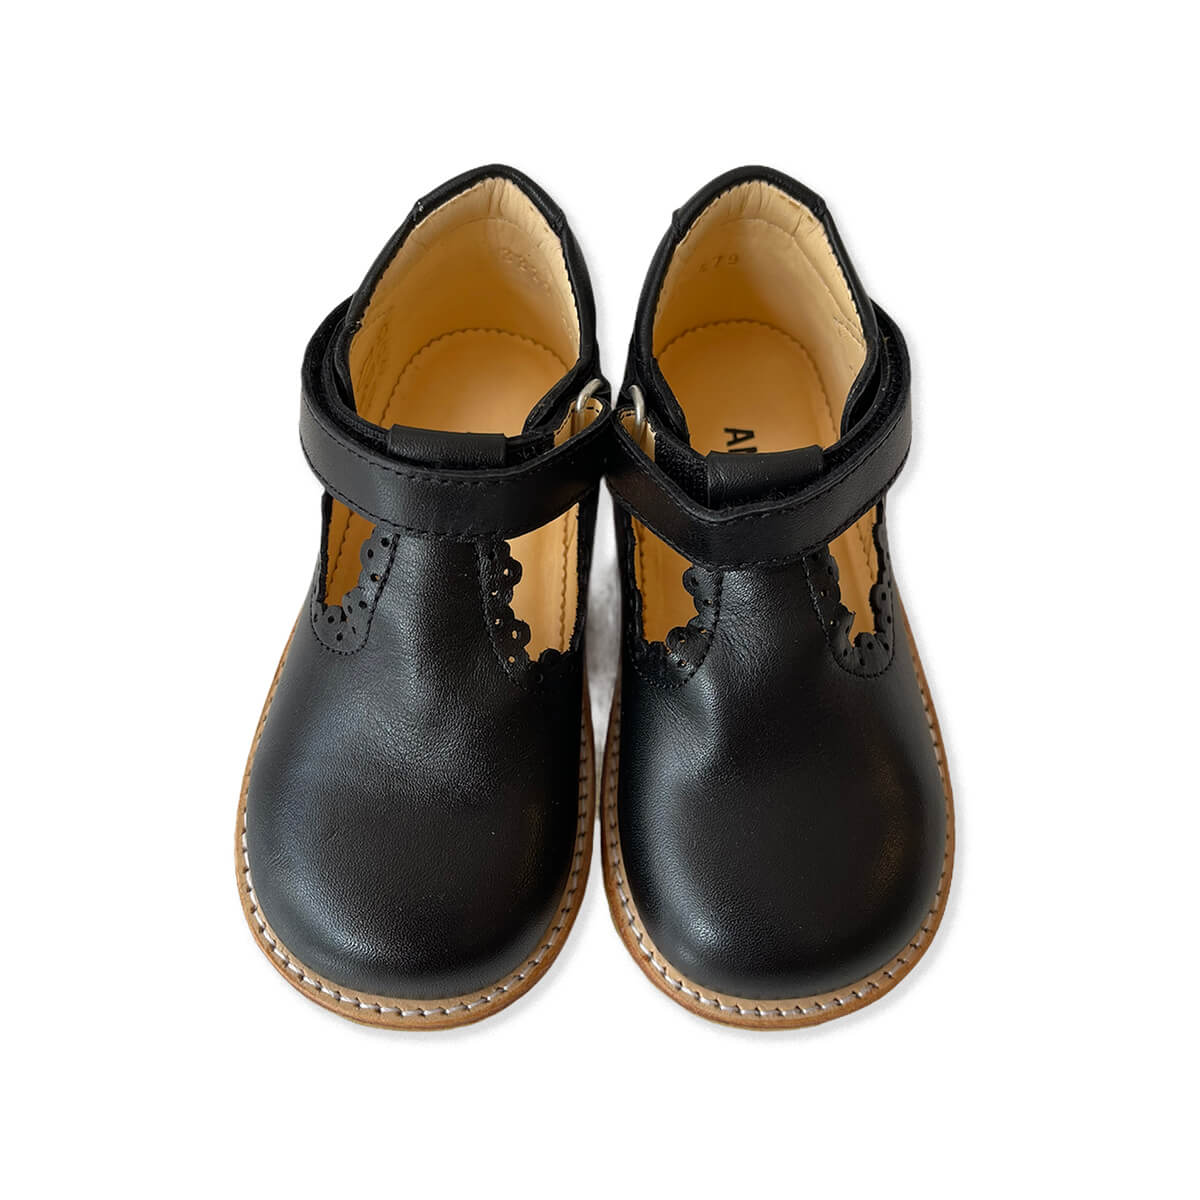 Voksen dilemma Profet Scallop T Bar Starter Mary Janes in Black by Angulus – Junior Edition